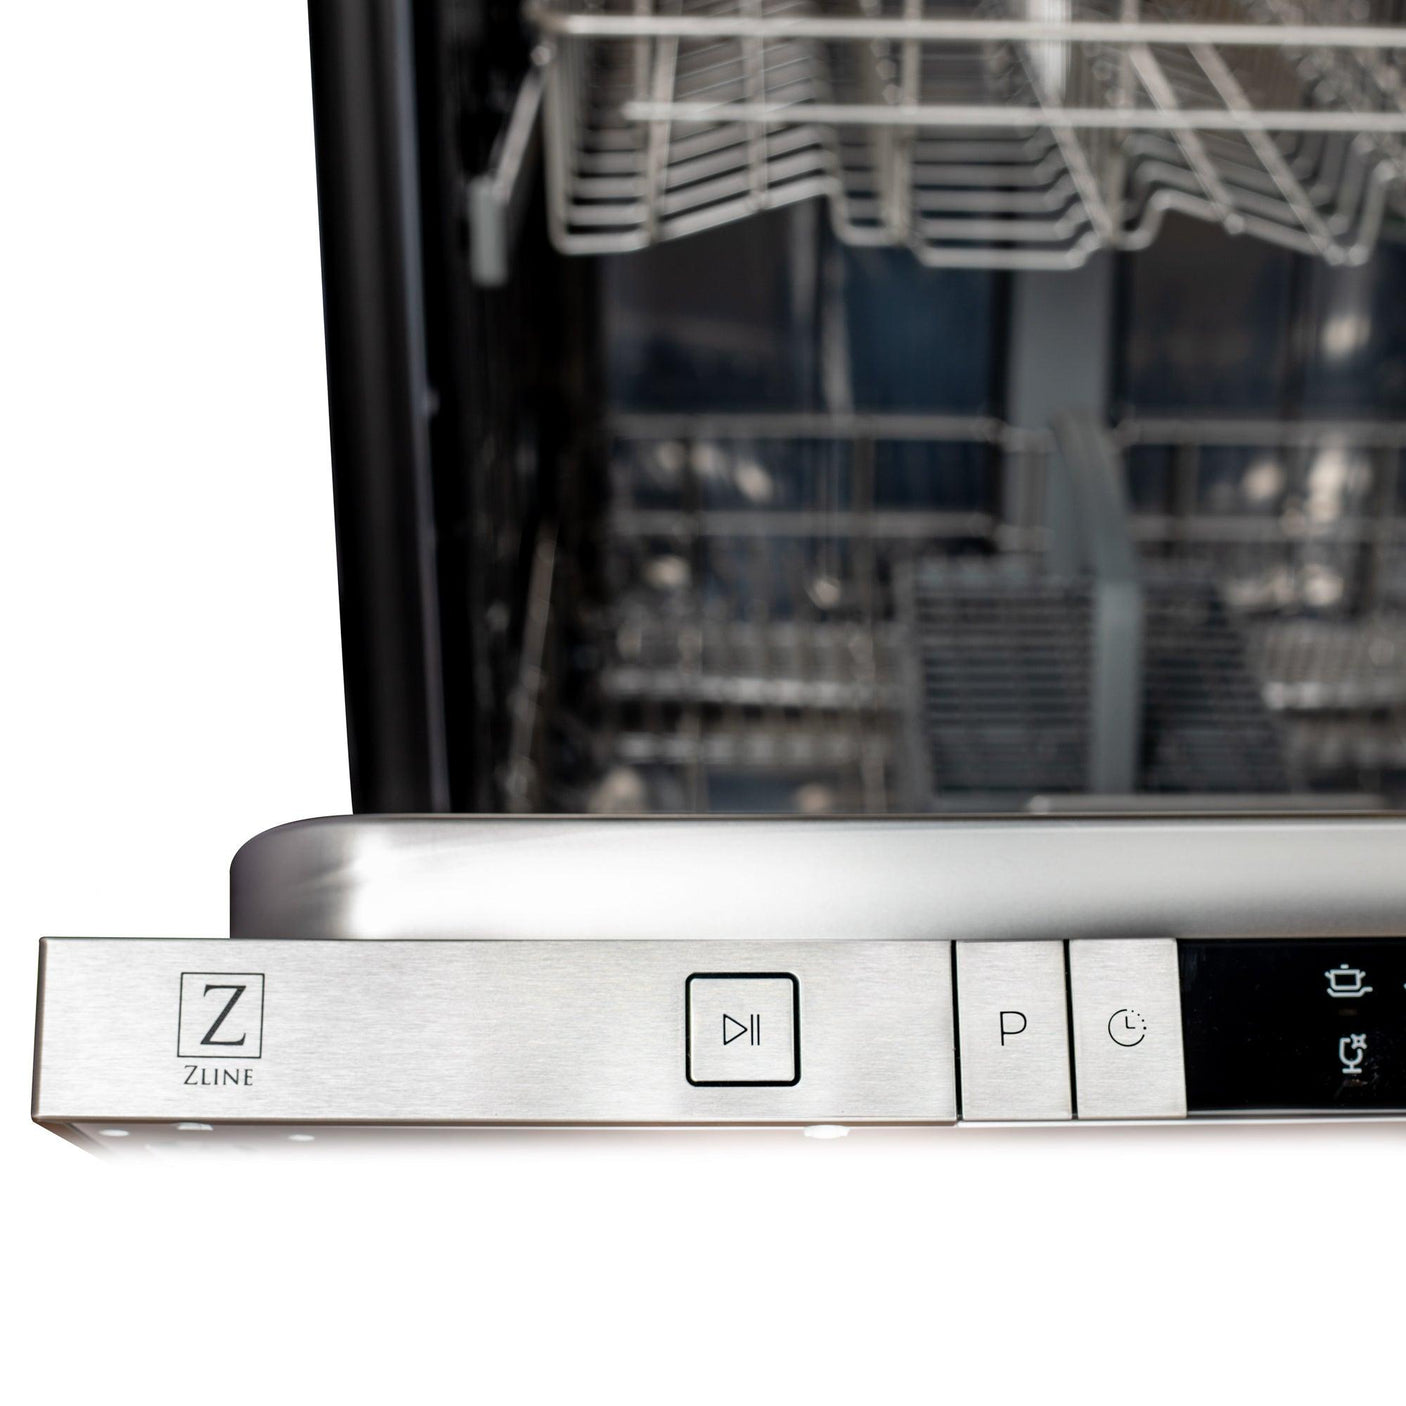 ZLINE 24 in. Top Control Dishwasher with Stainless Steel Tub and Traditional Style Handle, 52dBa (DW-24) [Color: White Matte]